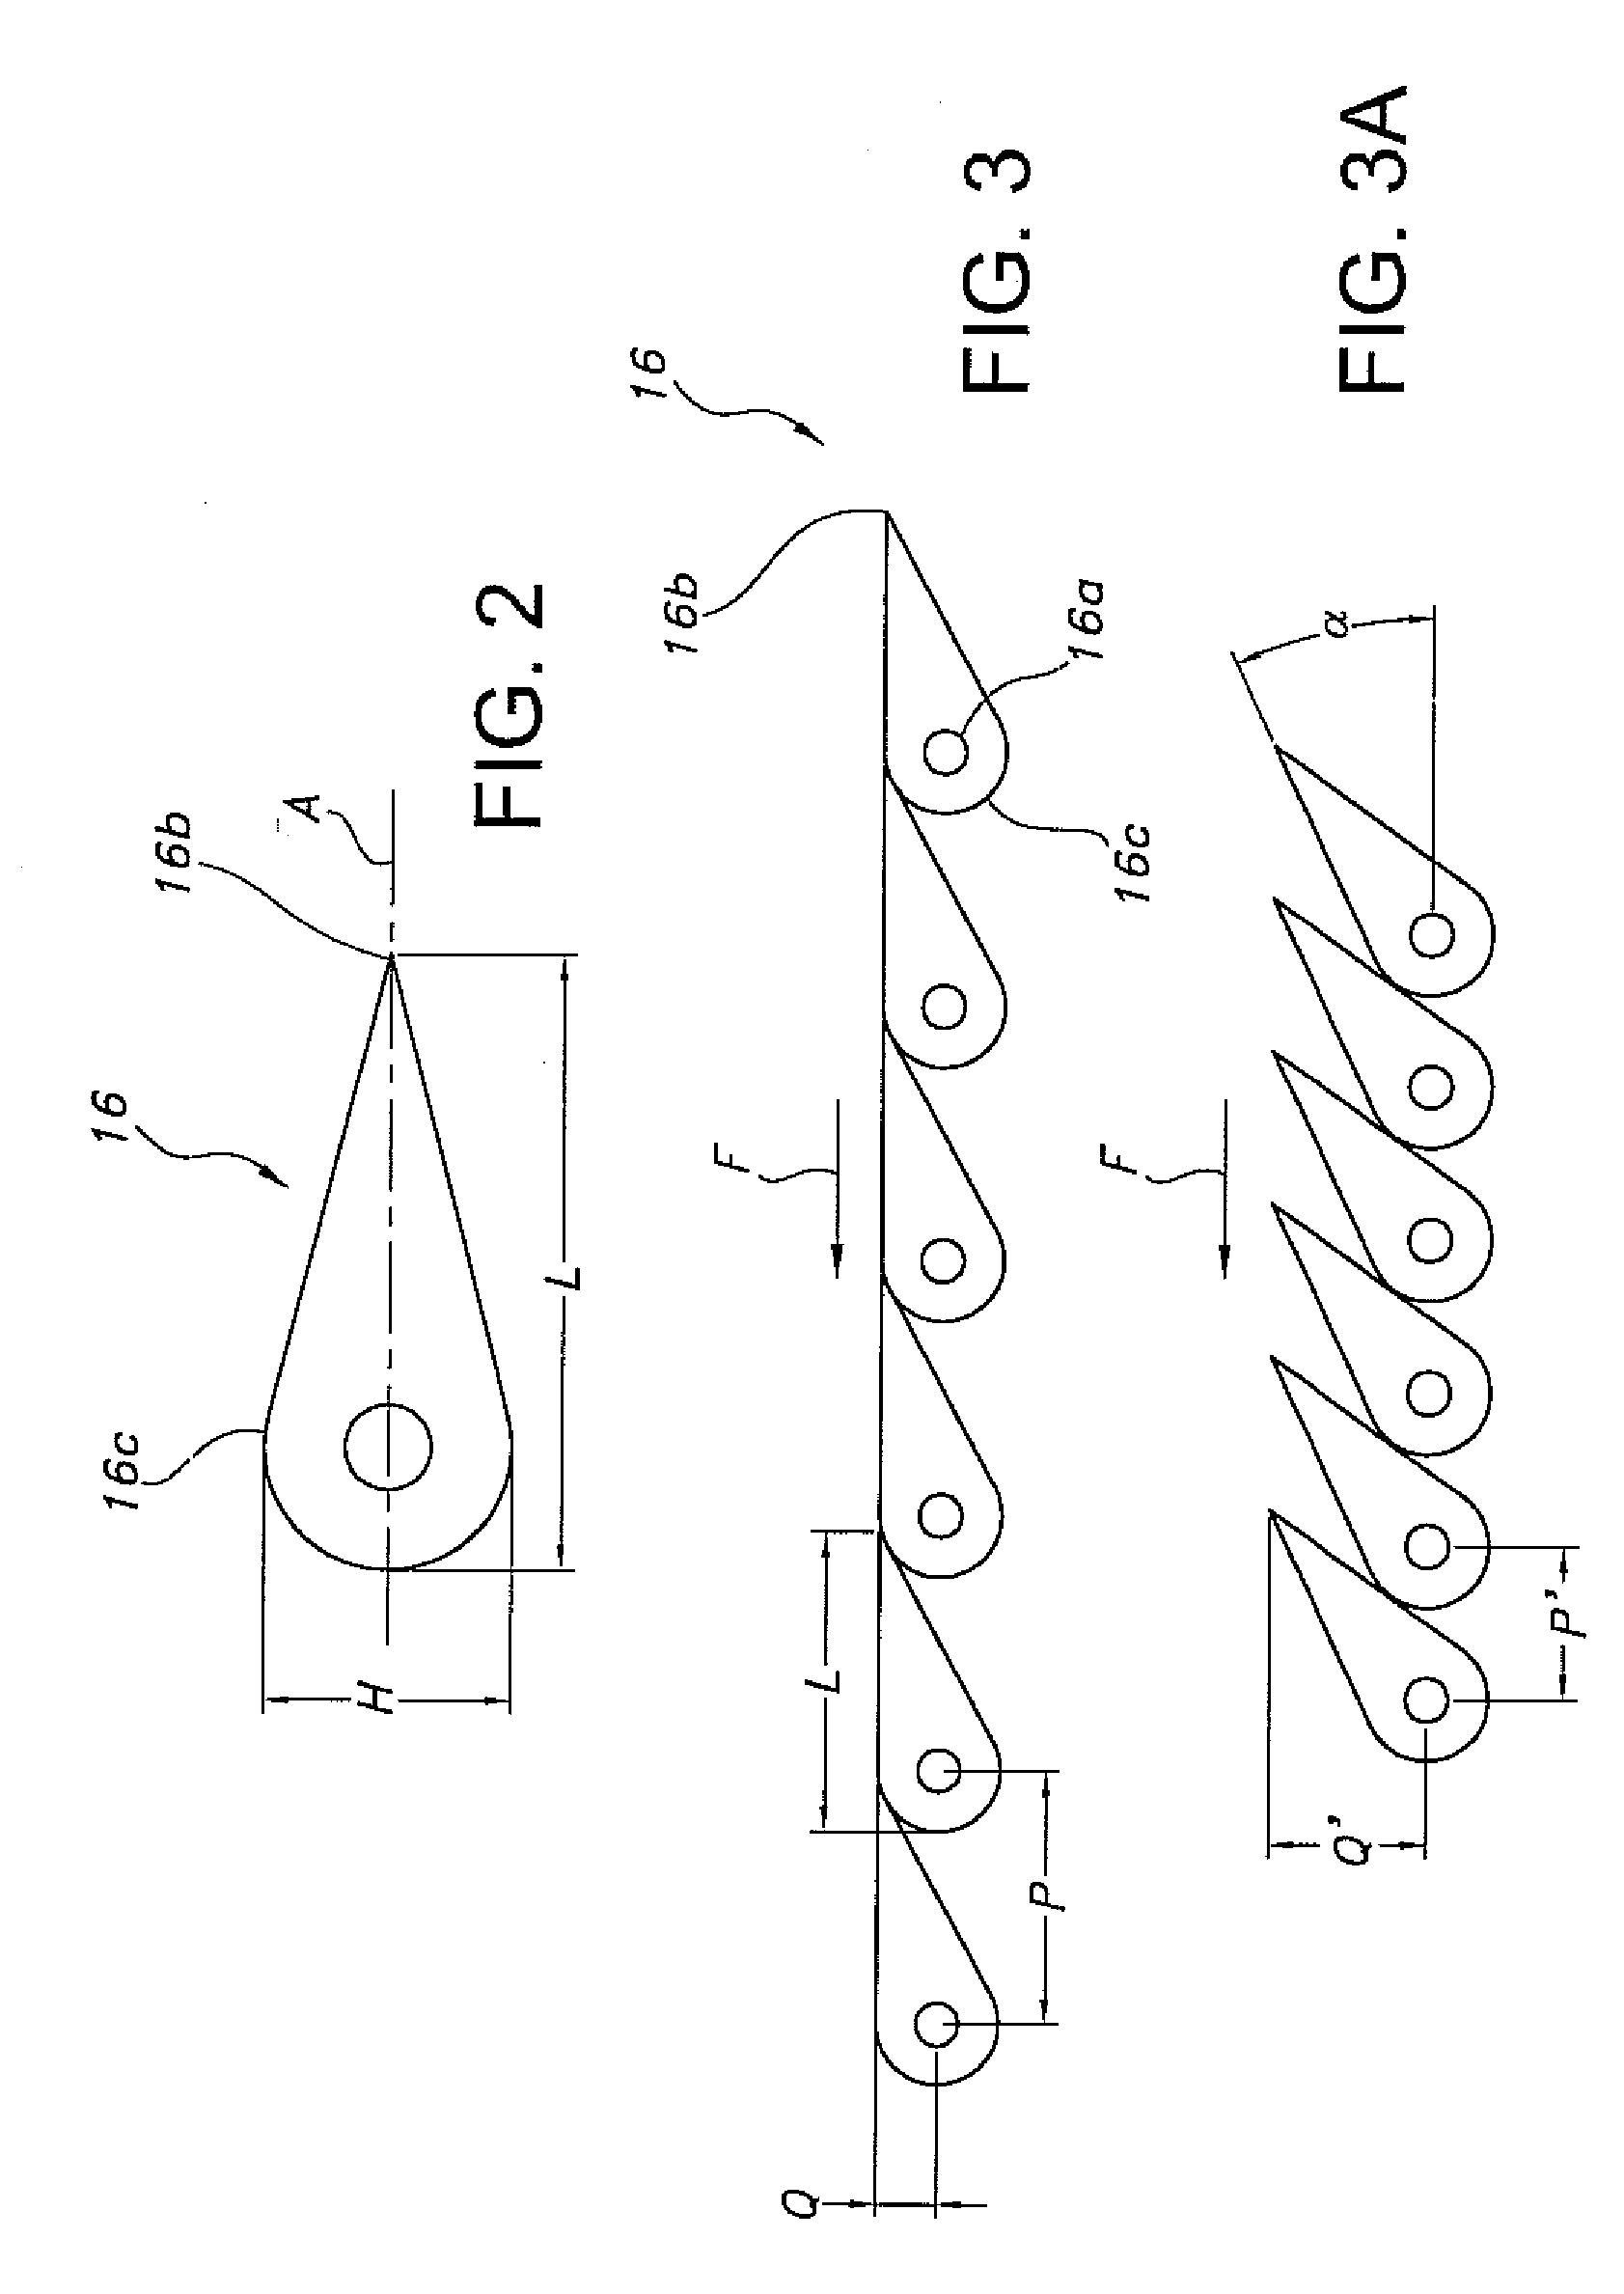 Side-flexing conveyor chain with pivoting slats and related methods